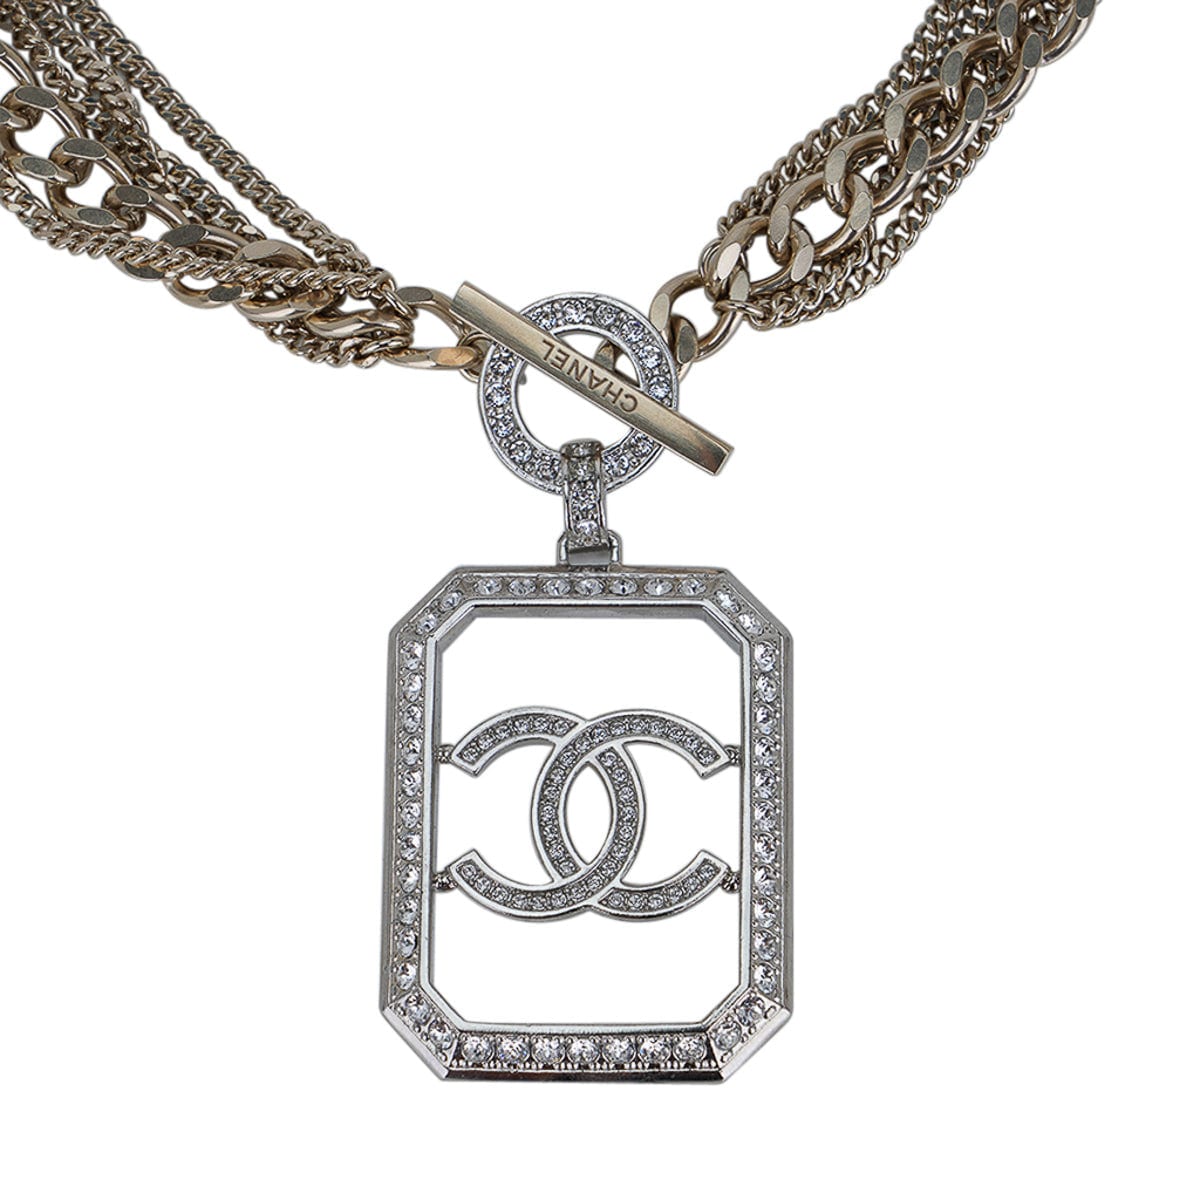 CHANEL 2017 DOUBLE STRAND GOLD CRYSTAL CC PEARL NECKLACE NEW  Chanel pearl  necklace, Chanel jewelry necklace, White pearl necklace